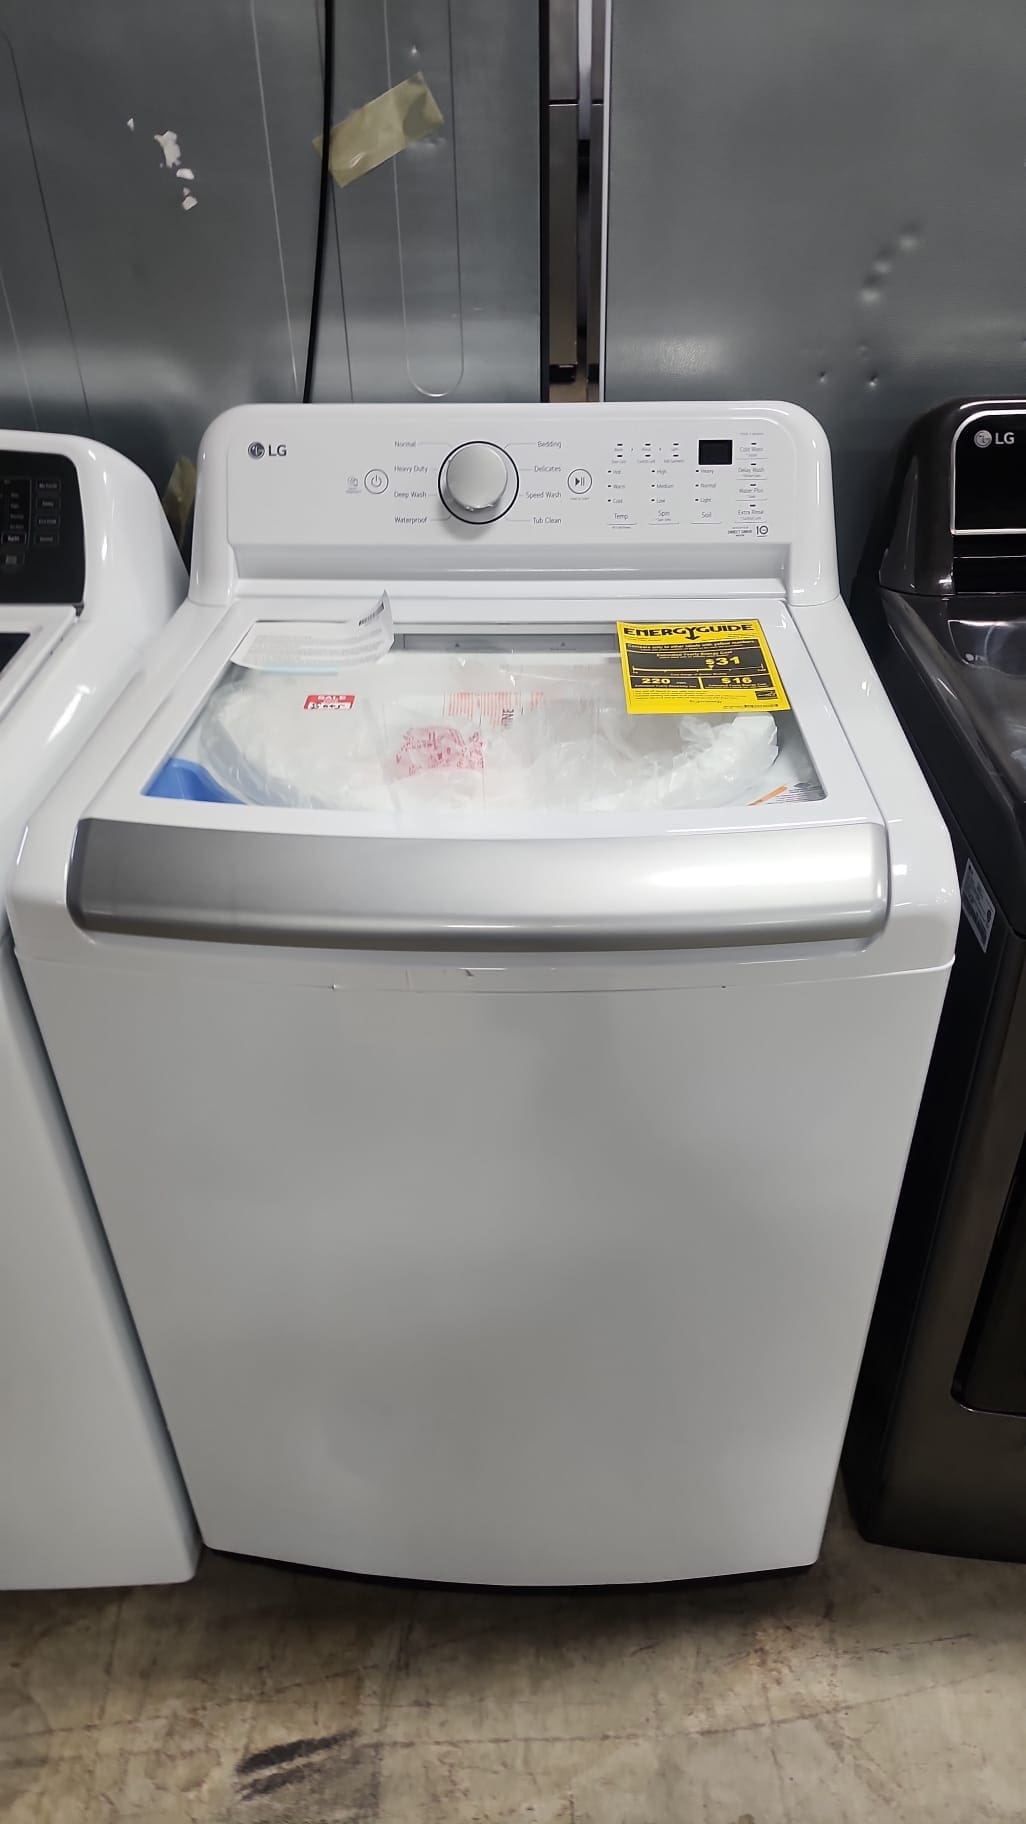 LG – New – 5.0 Cu. Ft. High-Efficiency Top Load Washer – White